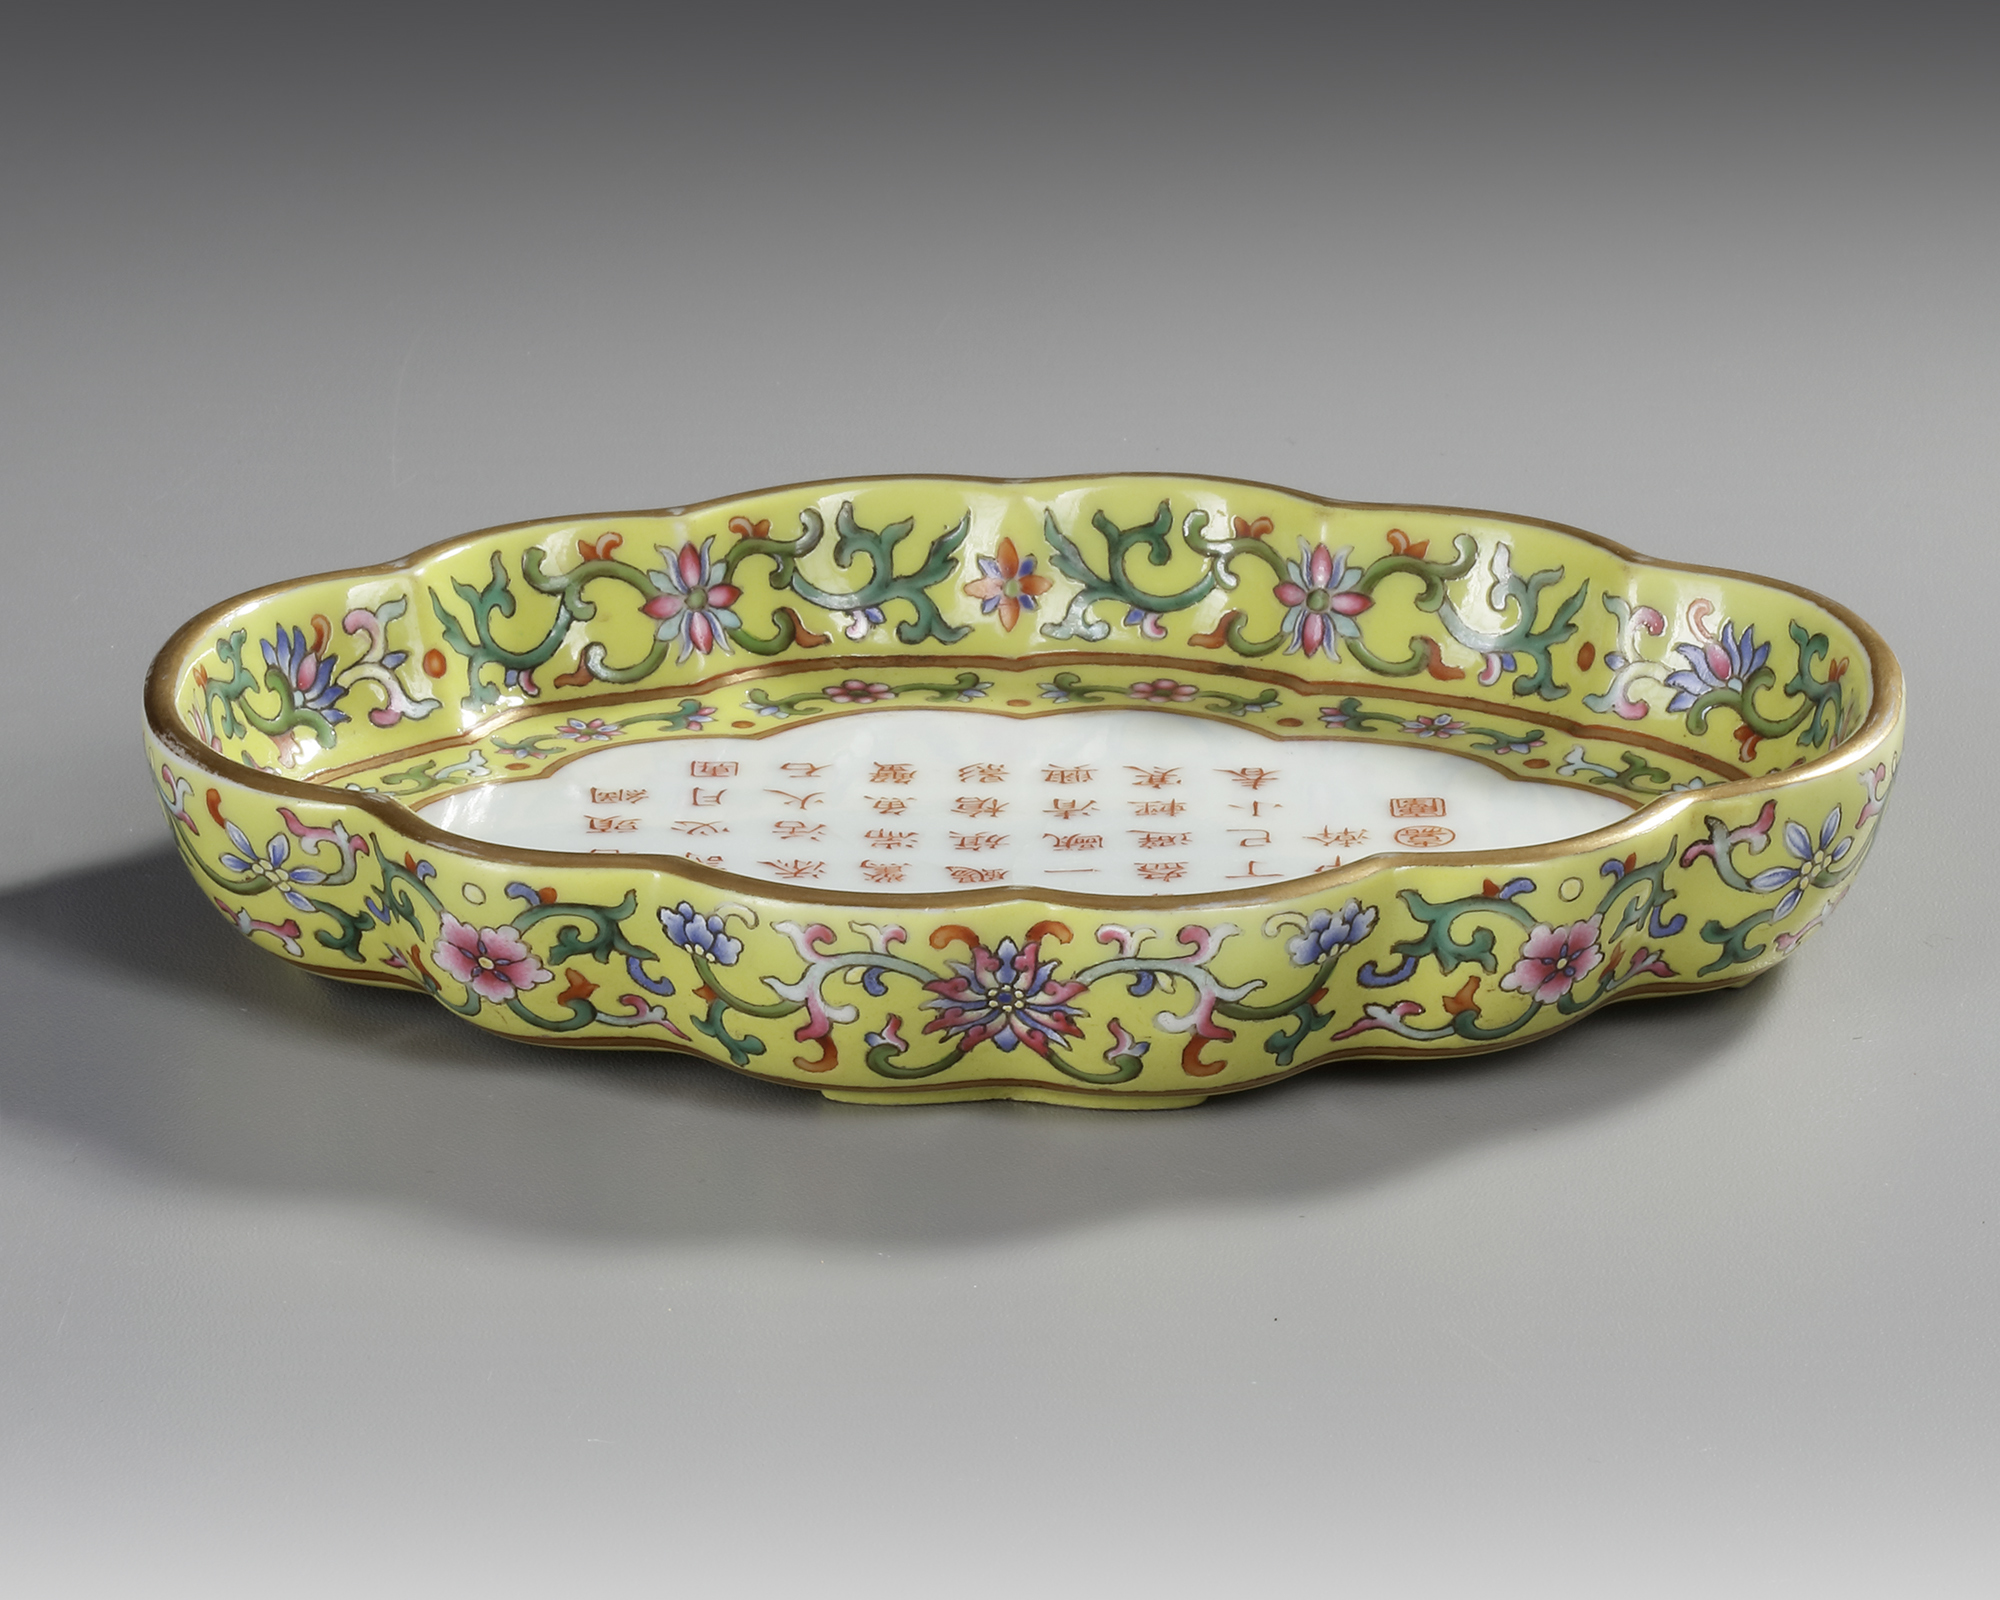 A CHINESE YELLOW-GROUND FAMILLE ROSE "TEA POEM" FOLIATE TRAY, QING DYNASTY (1636–1912) - Image 3 of 3